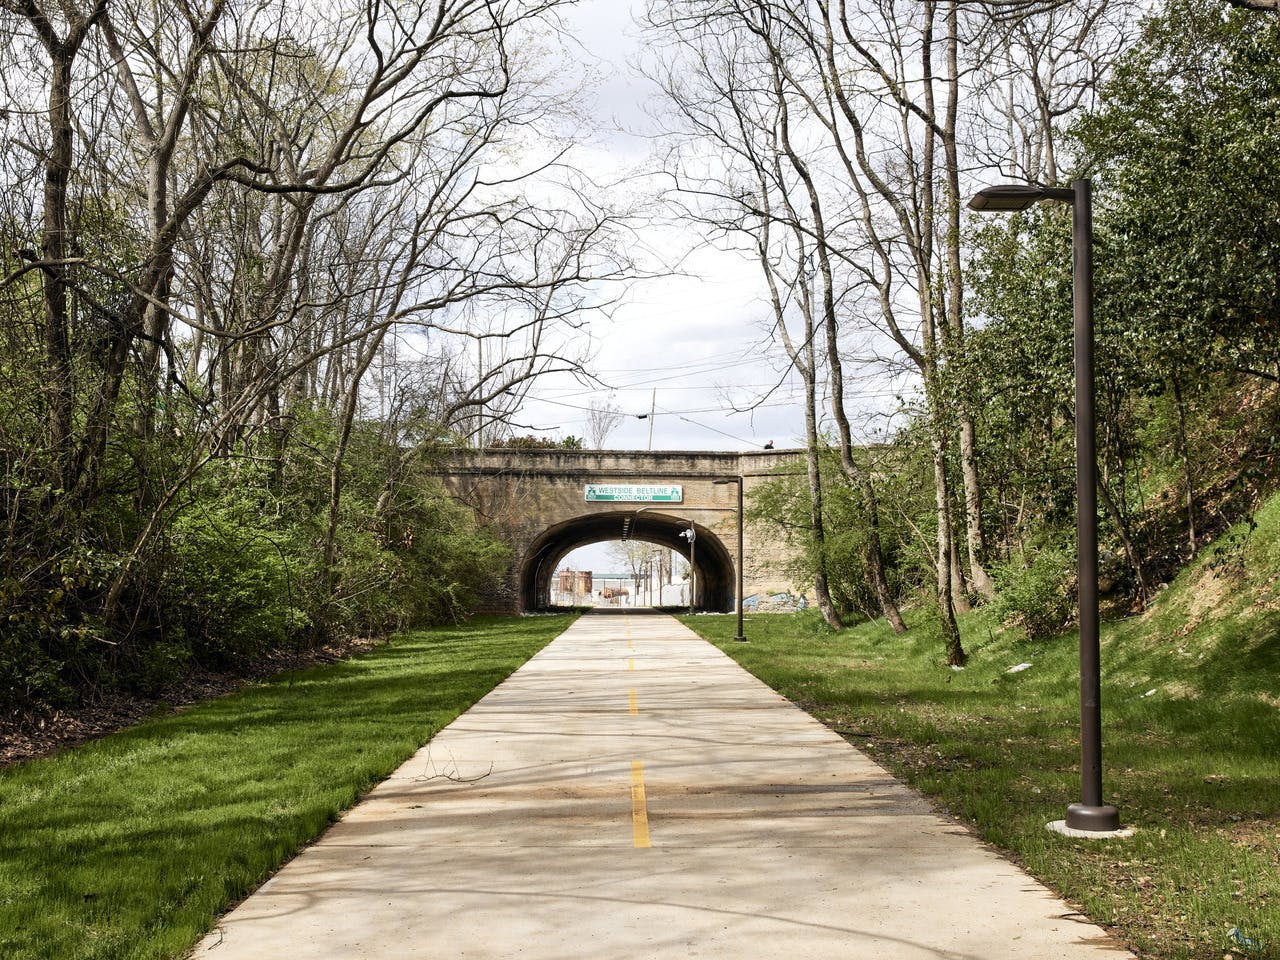 A paved pathway leads under a bridge with grass on both sides.